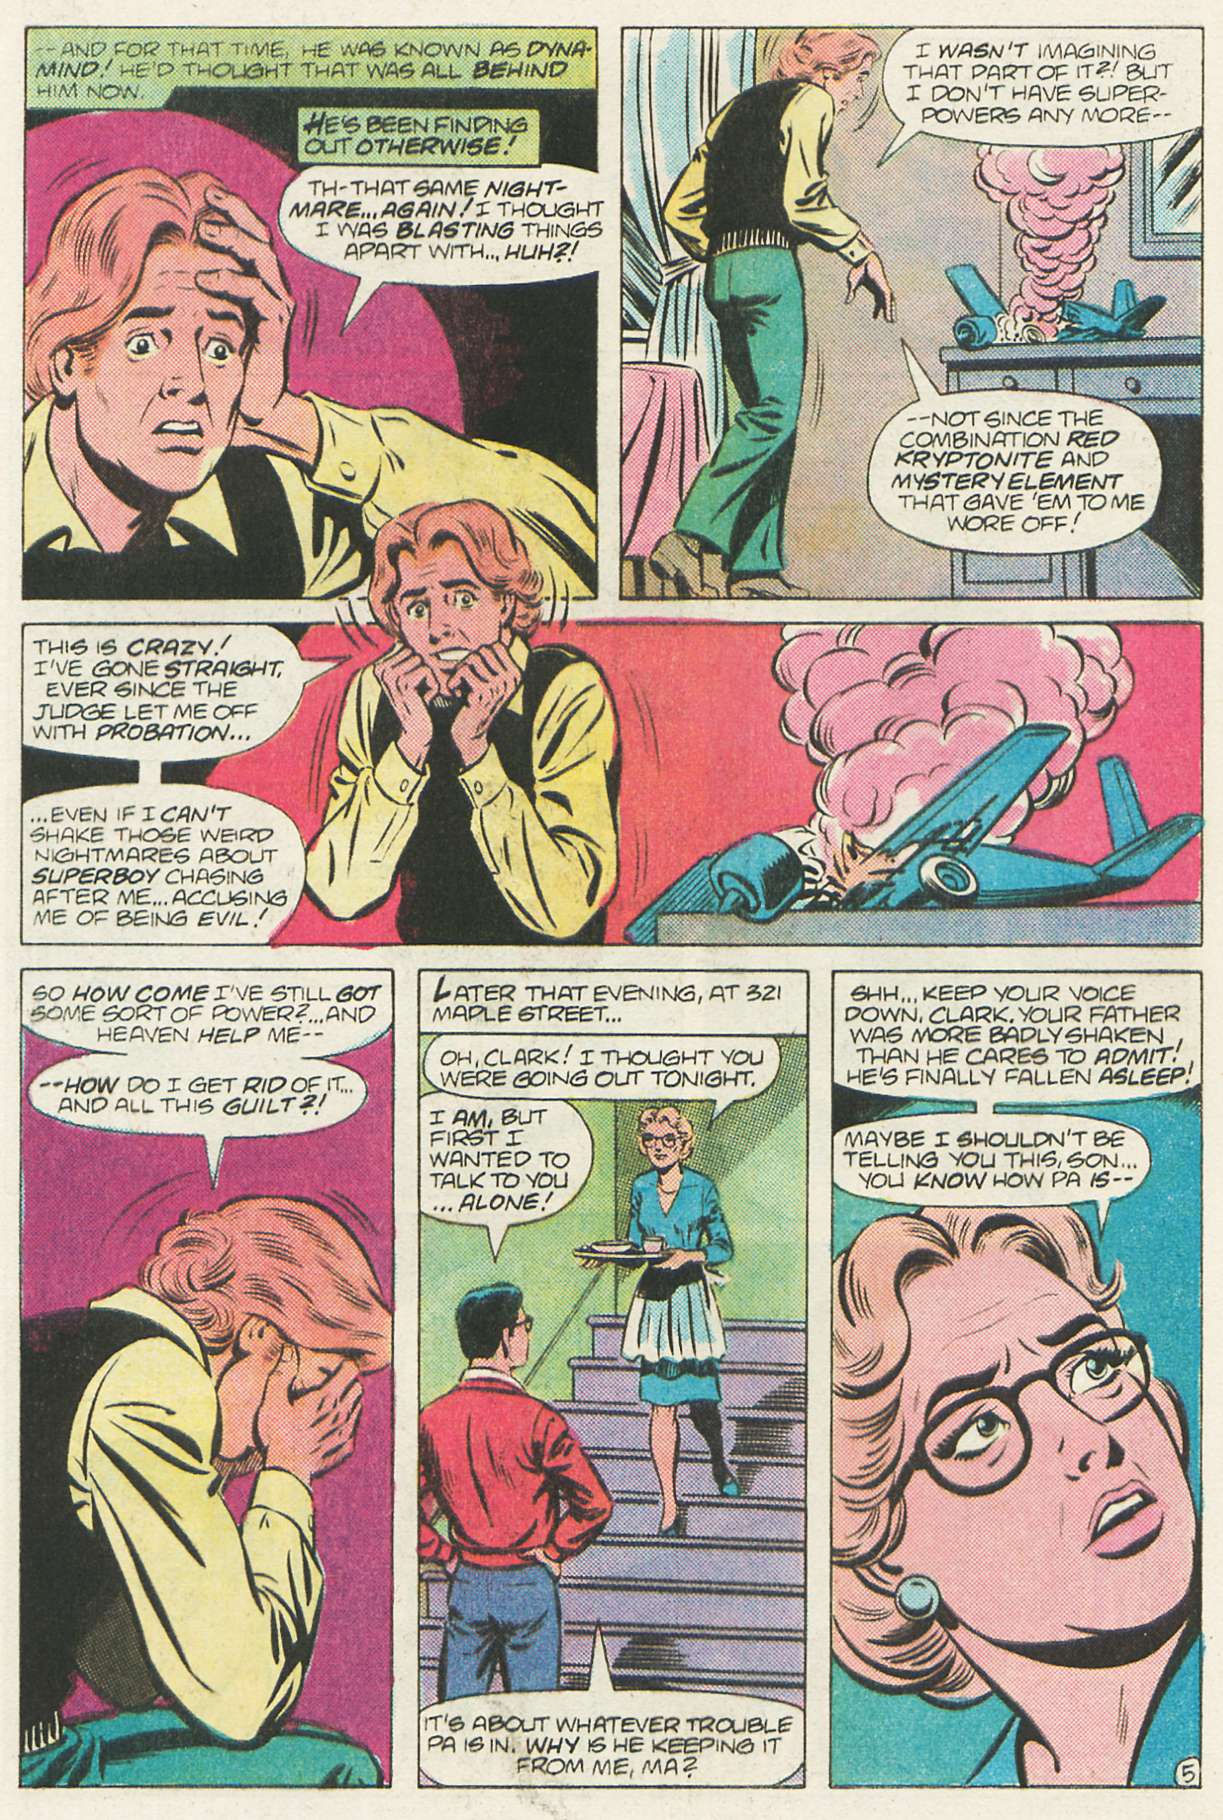 The New Adventures of Superboy 49 Page 5